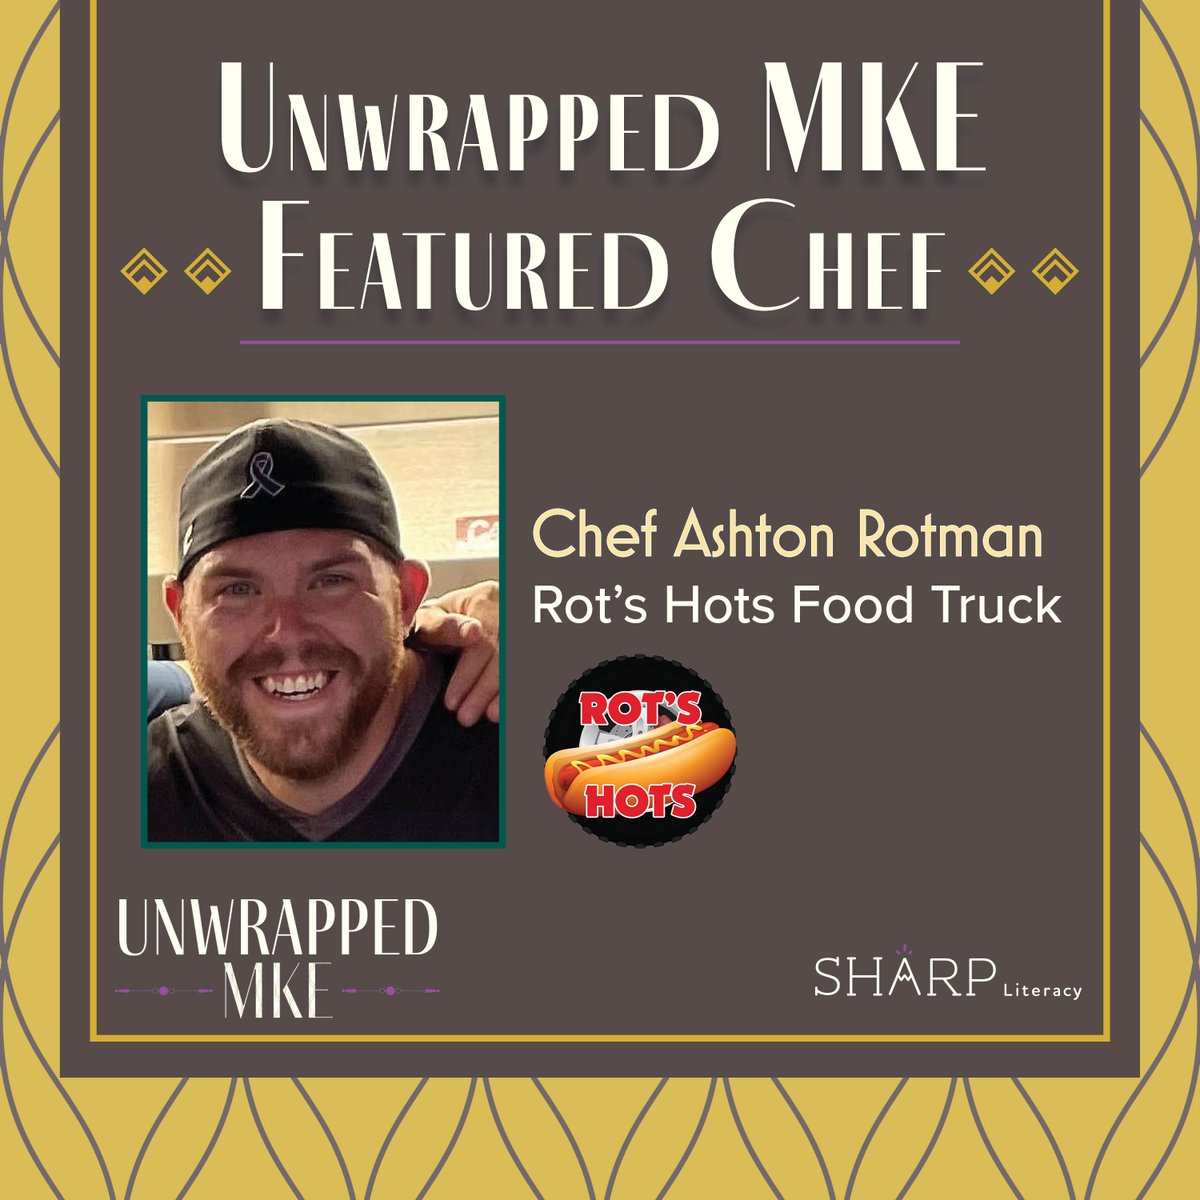 We are excited to have @ashton_rotman return to Unwrapped MKE! Ashton is owner and chef of Rot’s Hots Food Truck, local food truck with a modern take on the Chicago-style hot dog. Enjoy Chef Rotman’s McDonald’s based dish at Unwrapped MKE! Get your tickets to Unwrapped MKE today!